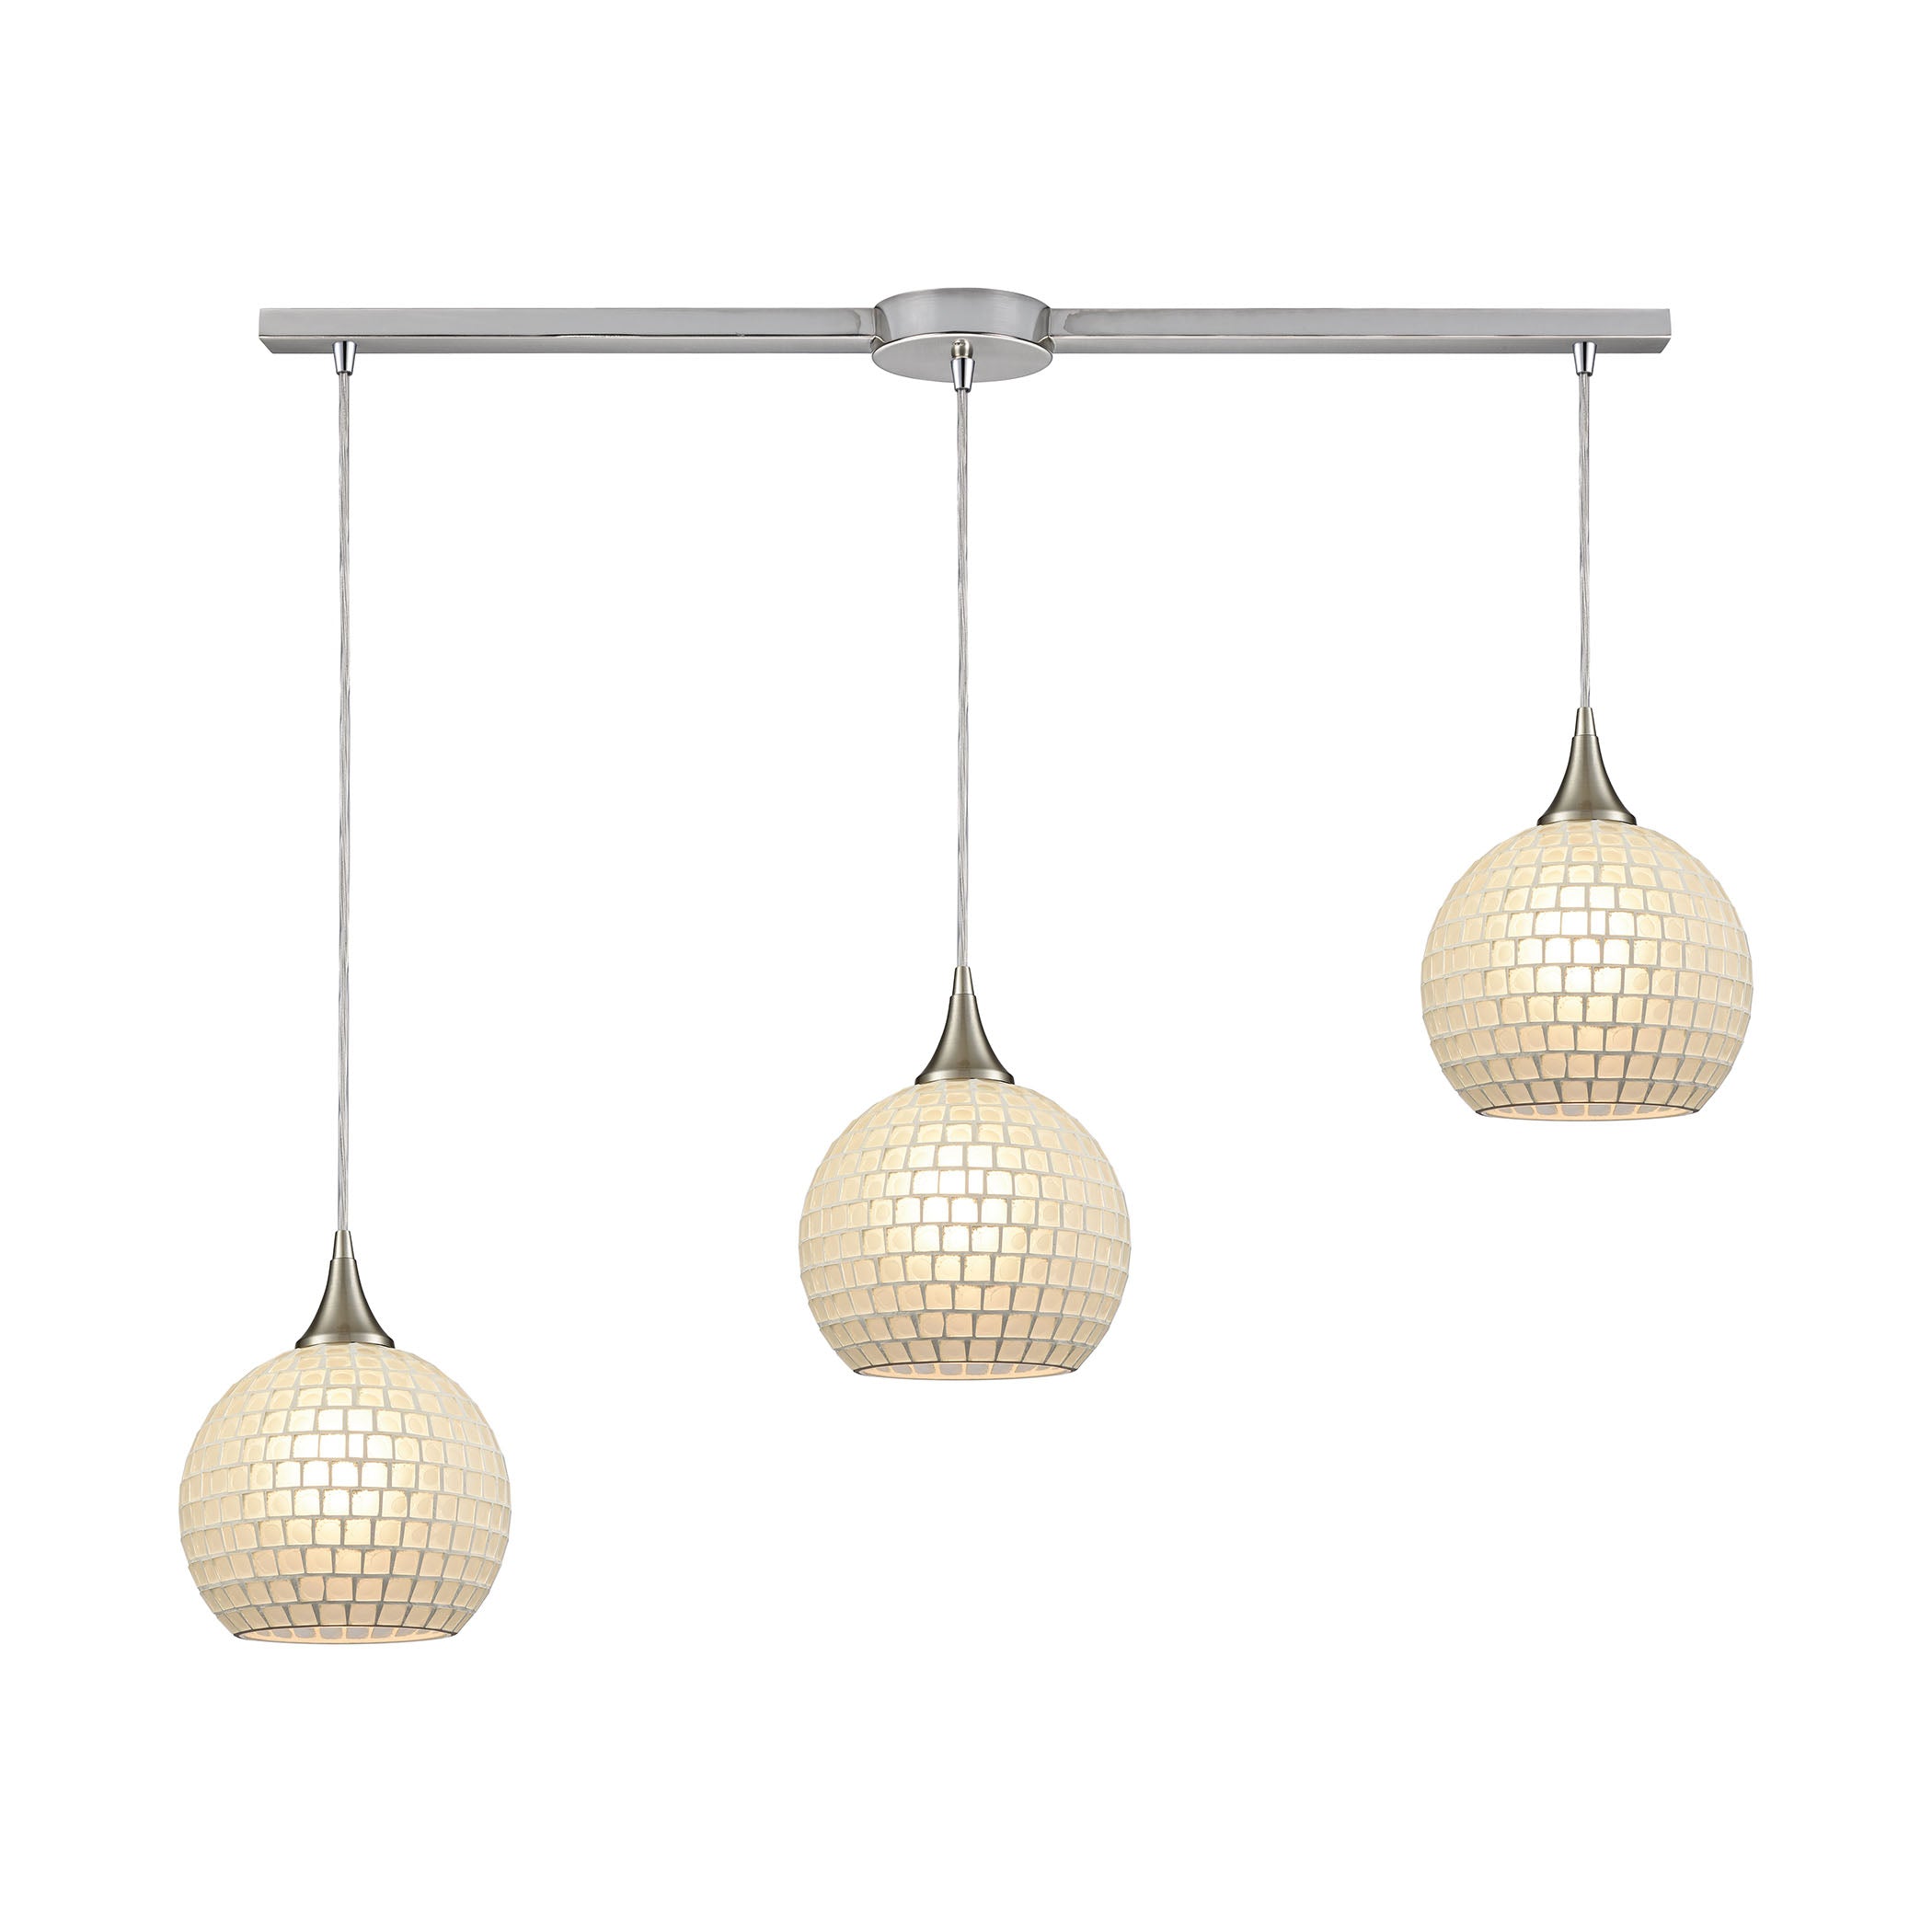 ELK Lighting 529-3L-WHT Fusion 3-Light Linear Mini Pendant Fixture in Satin Nickel with White Mosaic Glass